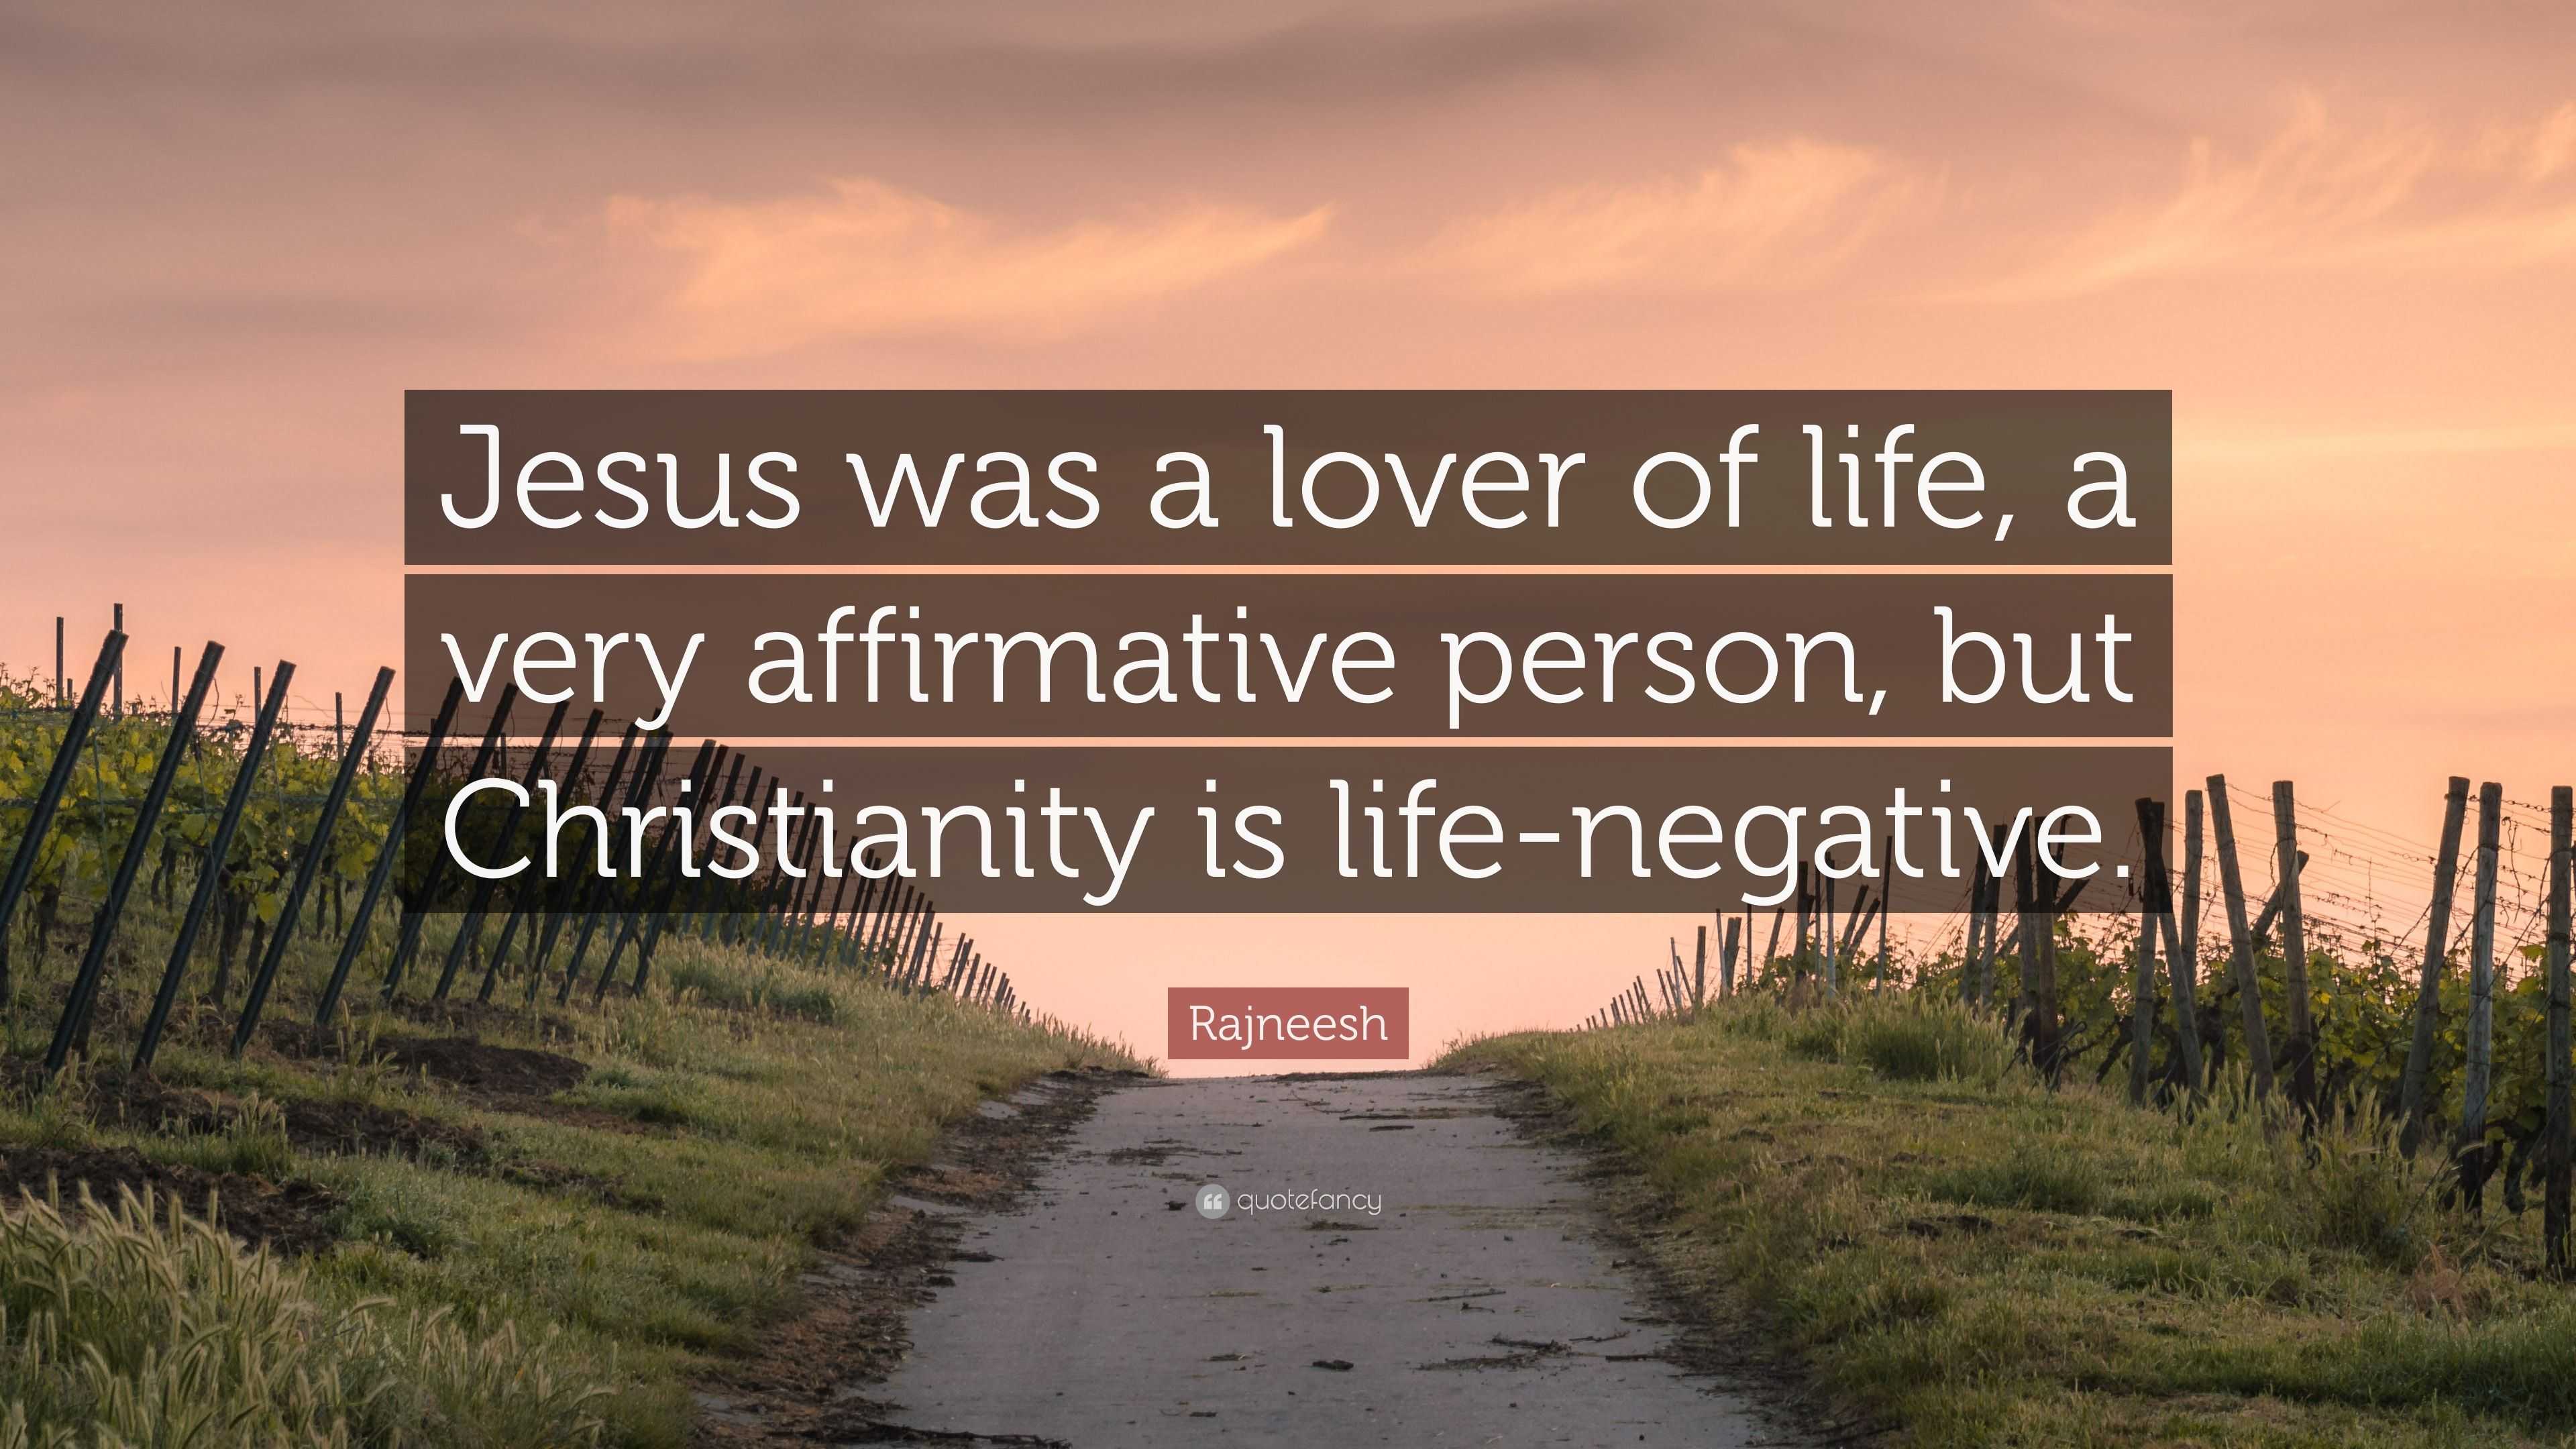 Rajneesh Quote: “Jesus was a lover of life, a very affirmative person ...